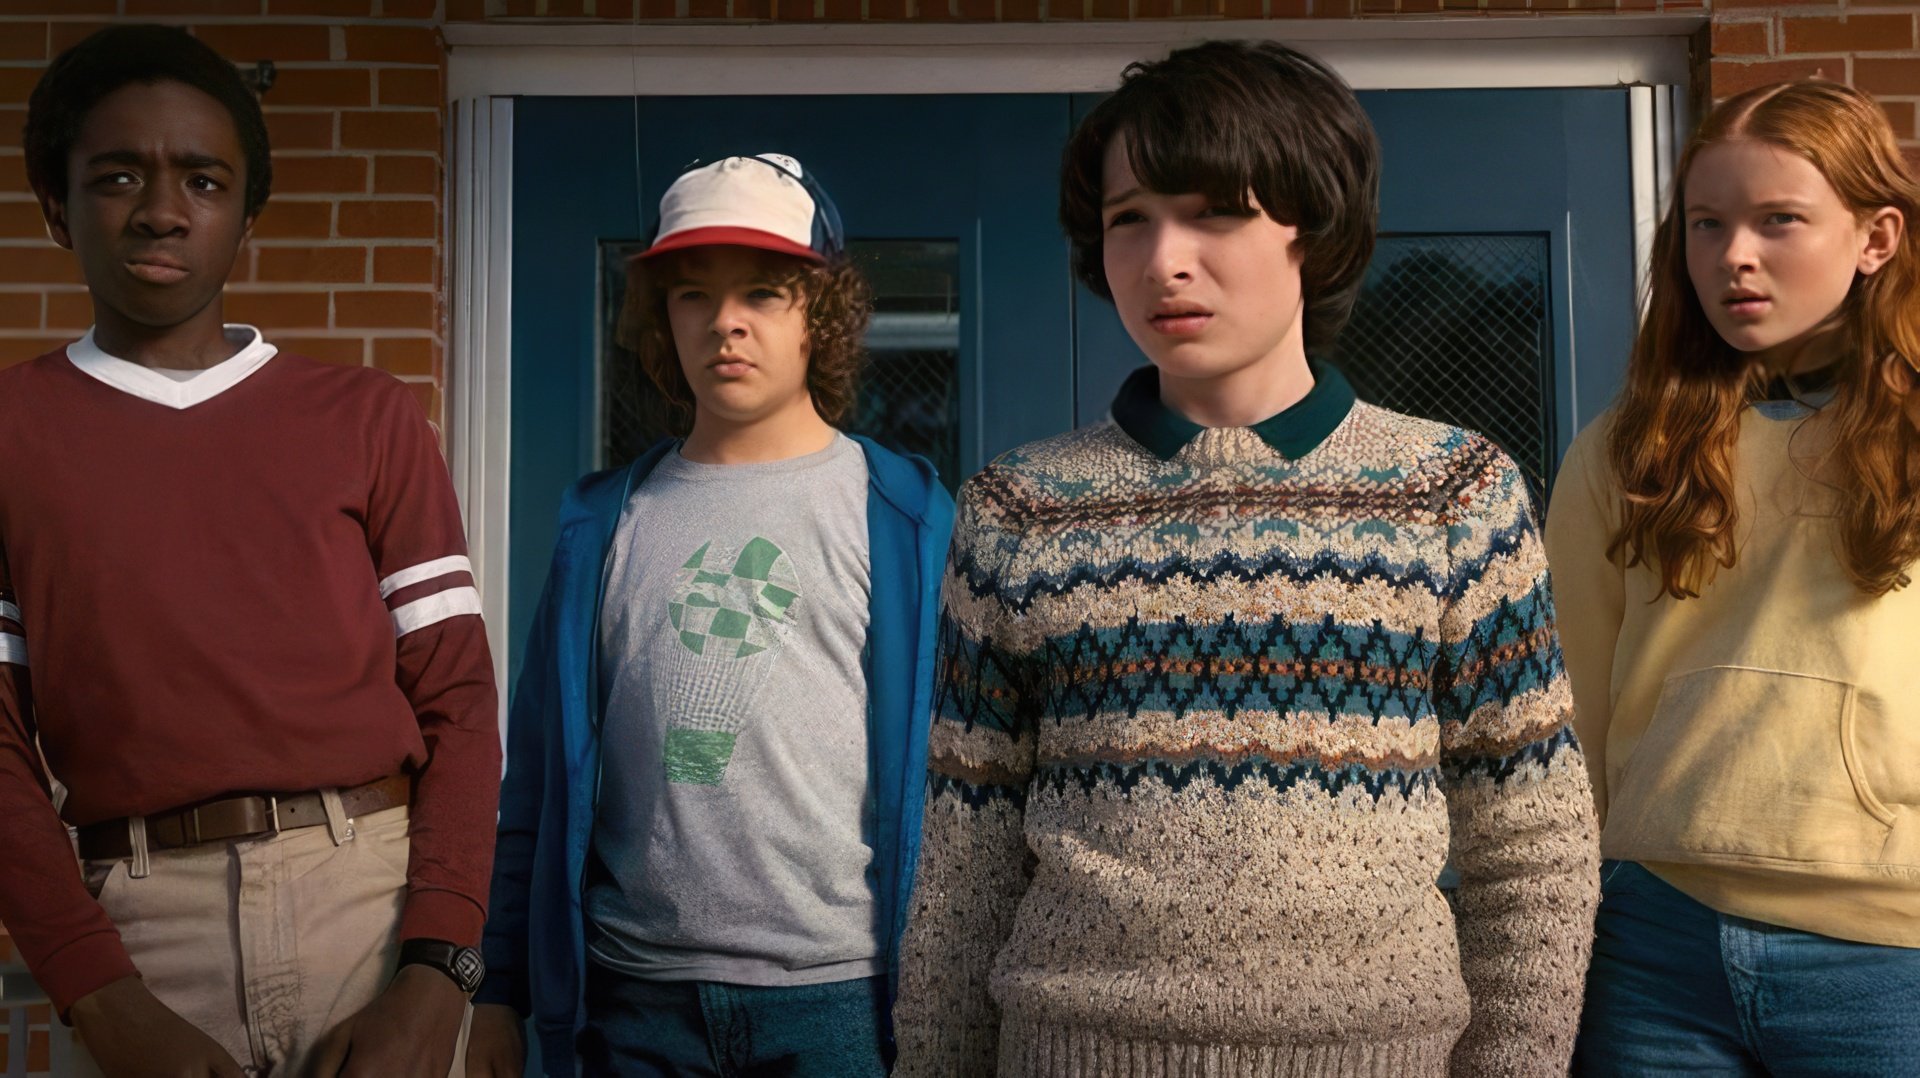 A Frame from the TV Series Stranger Things